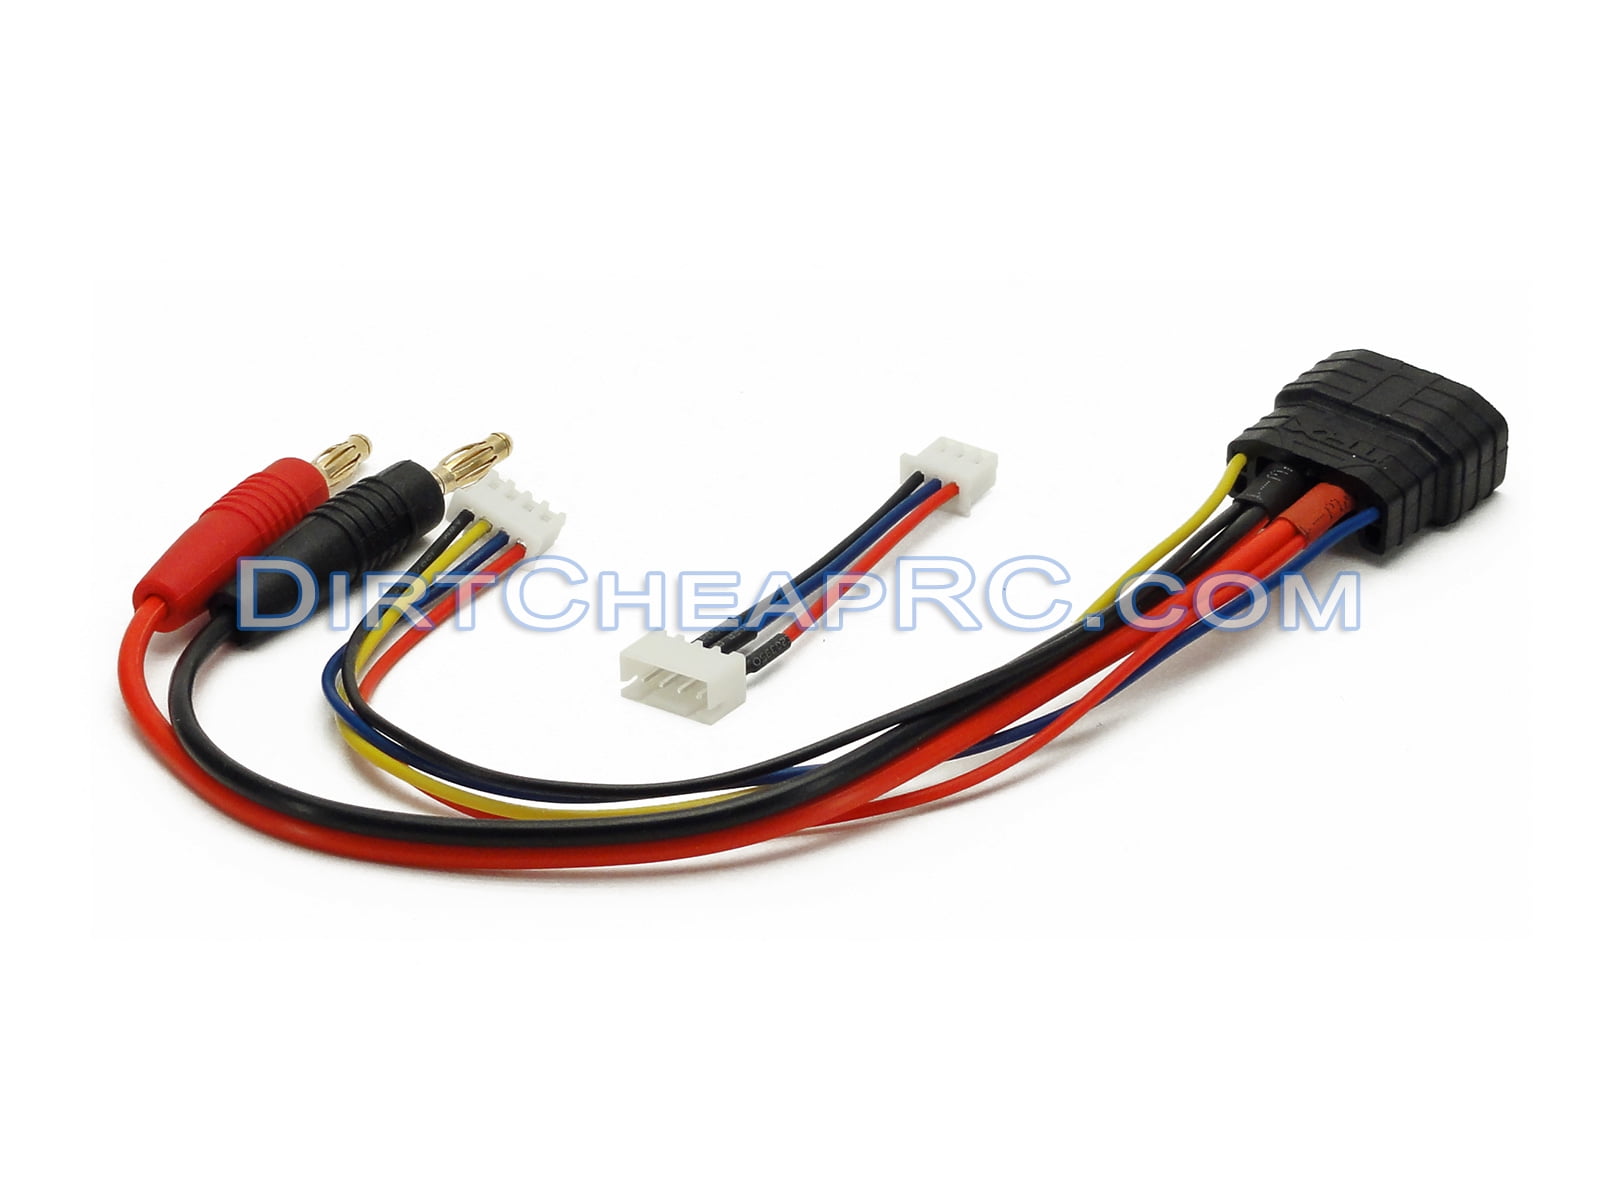 Duratrax DTXC2222 Charge Lead Banana Plugs to Traxxas Male for sale online